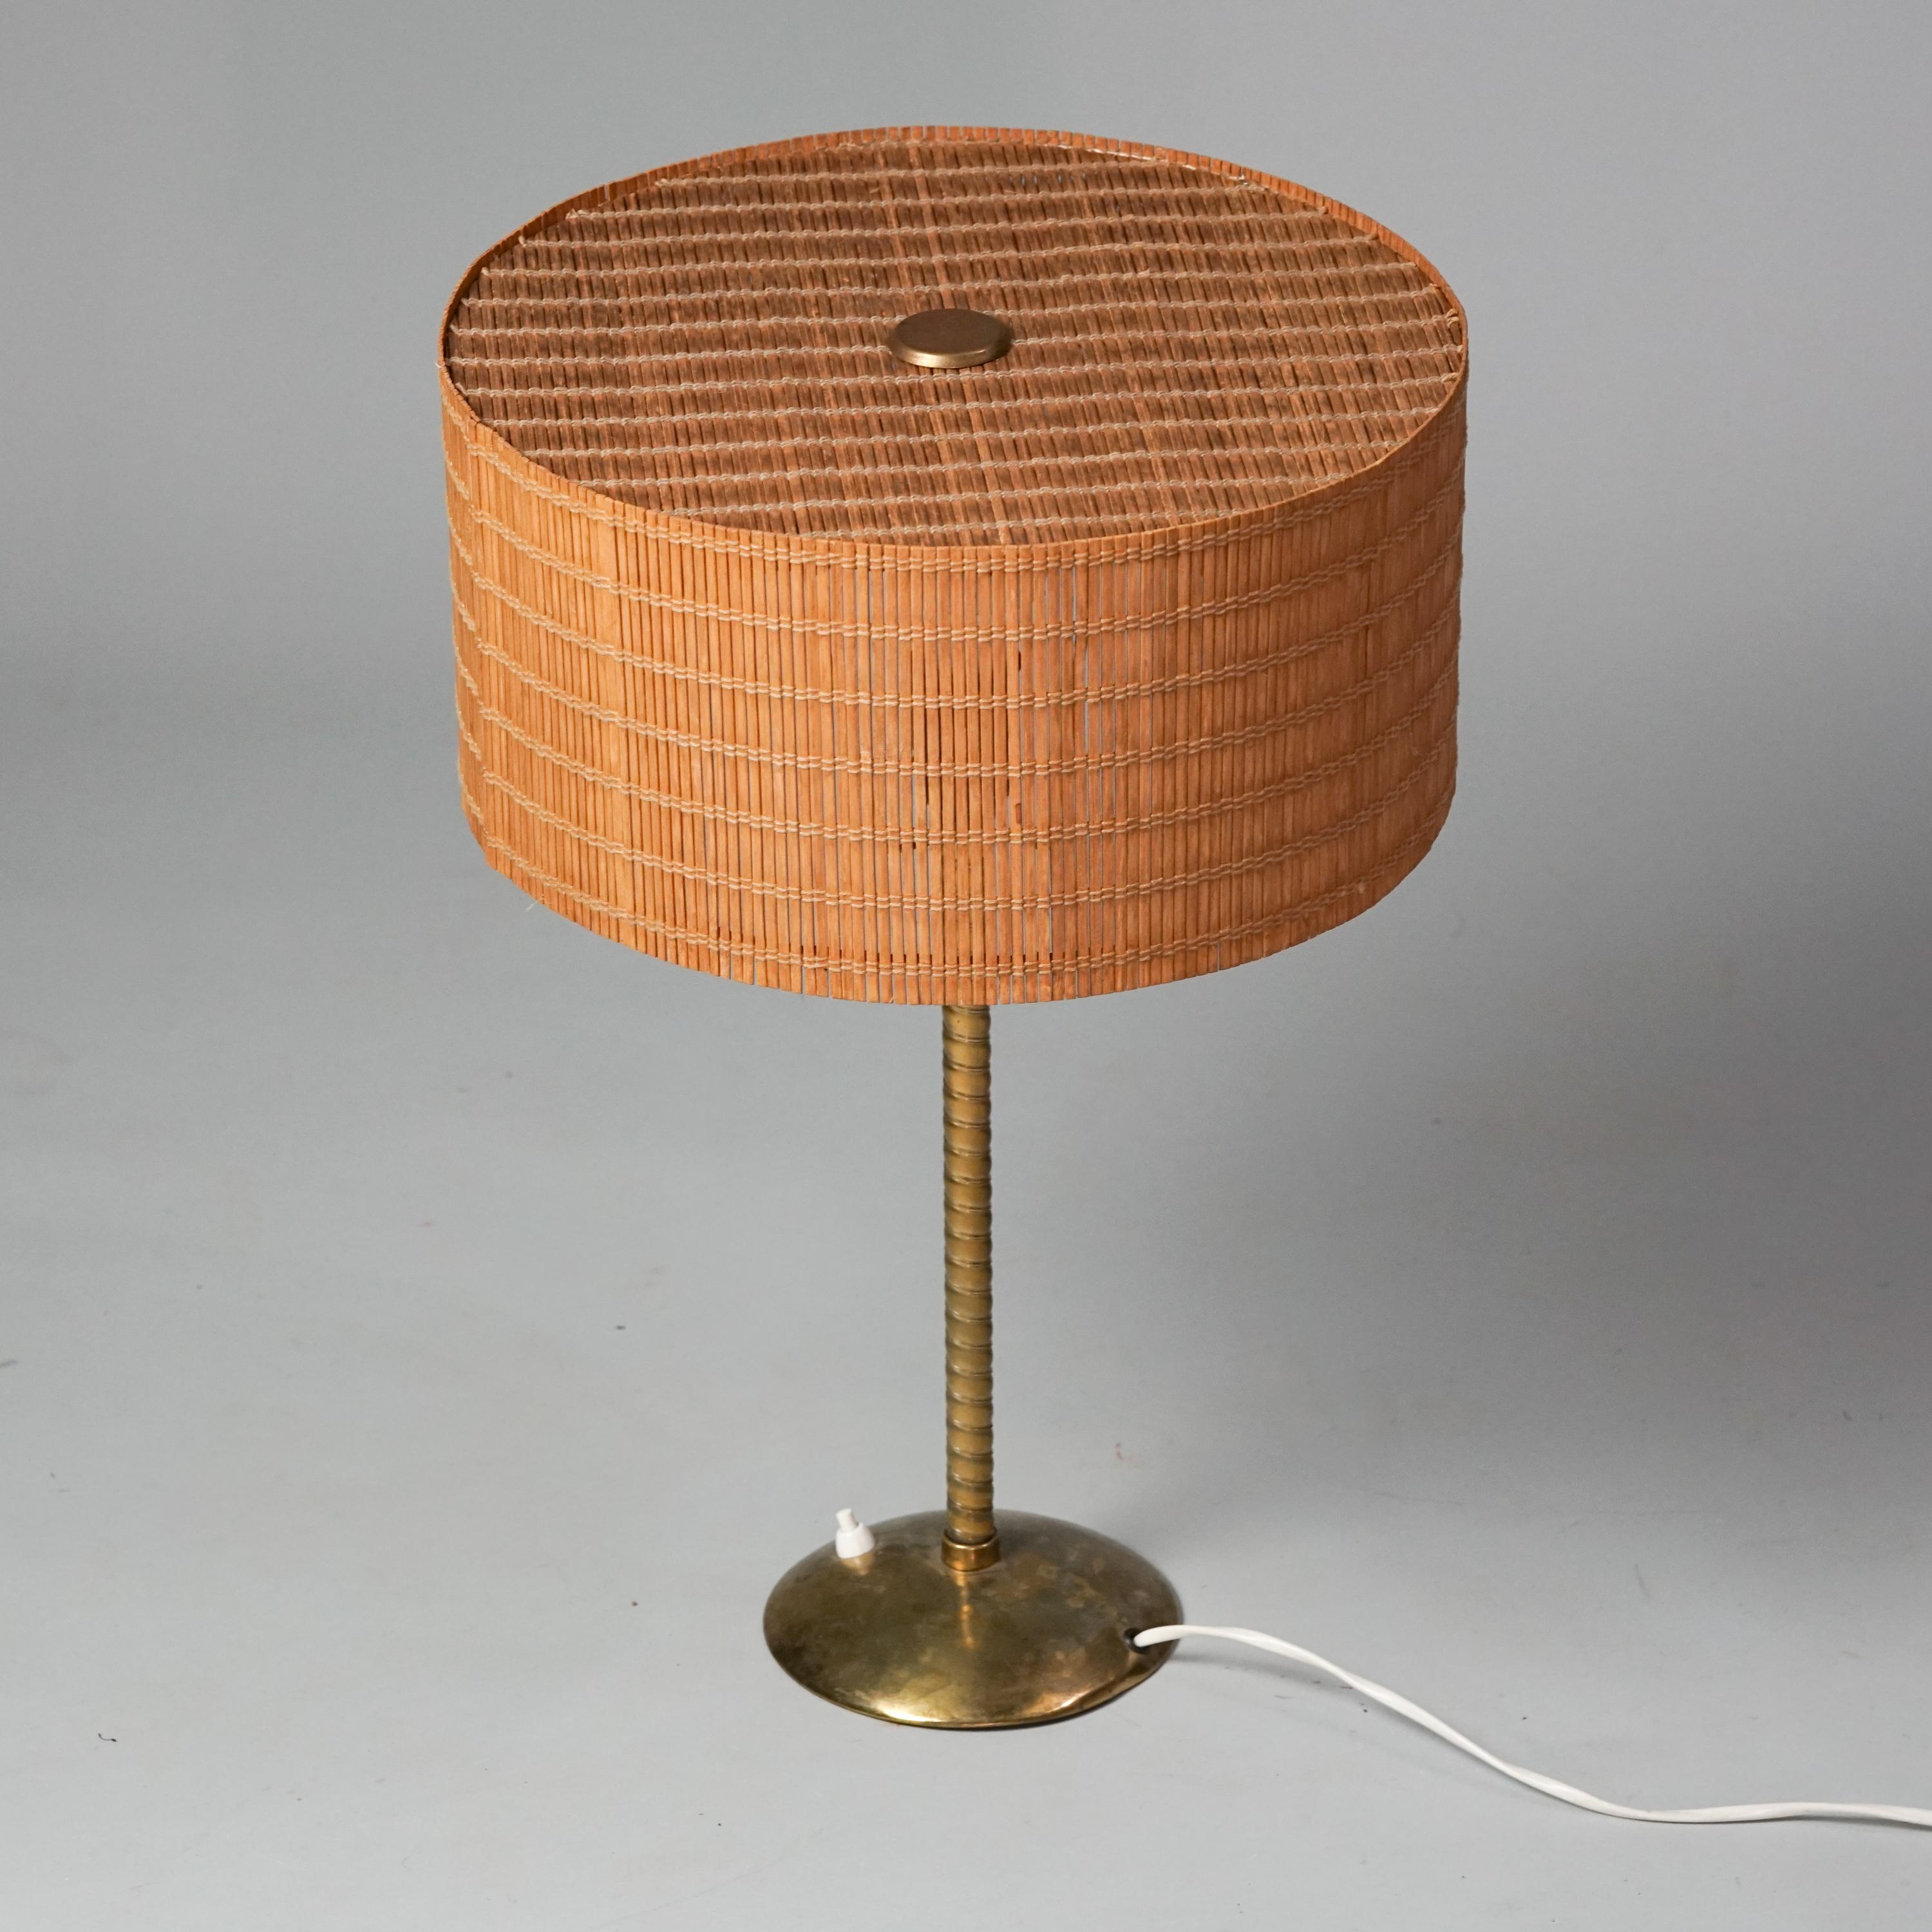 Rare Lisa Johansson-Pape Table Lamp, Orno Oy, 1940/1950s In Good Condition For Sale In Helsinki, FI